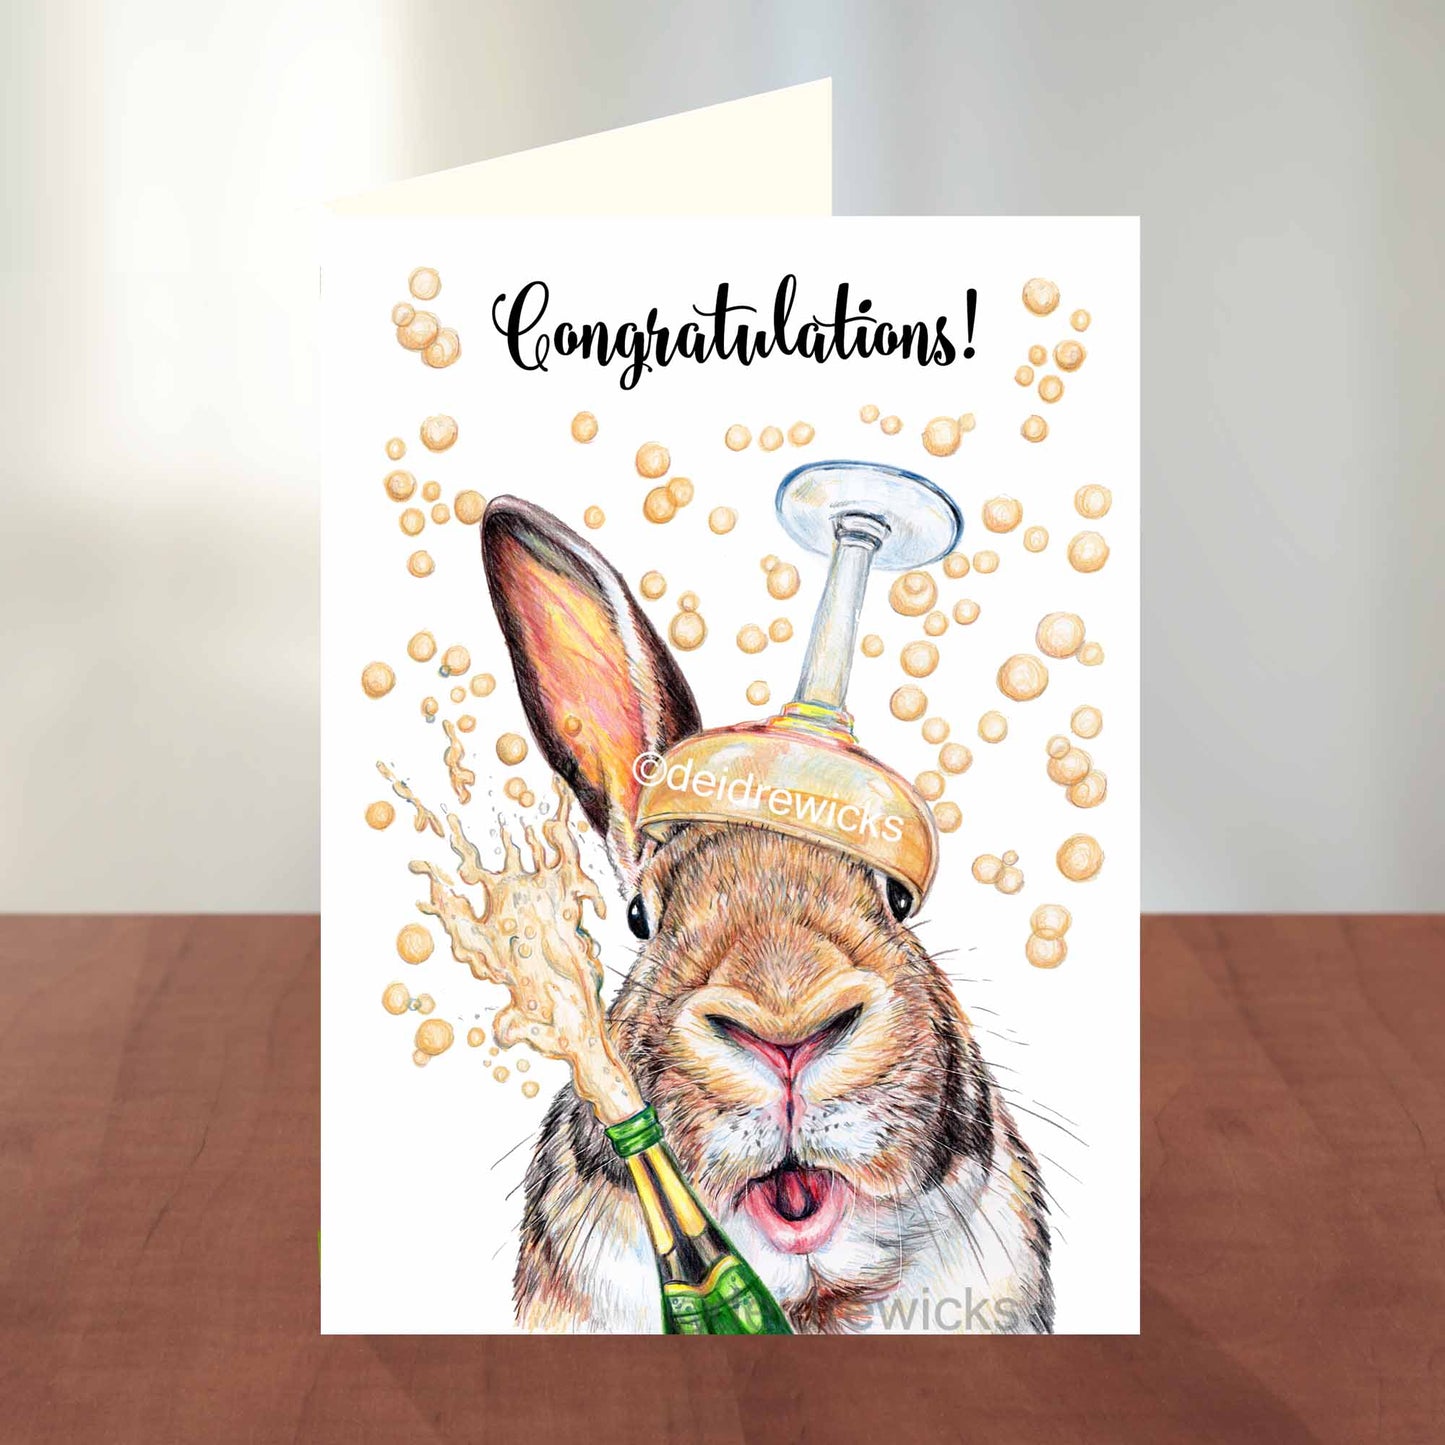 Congratulations greeting card featuring a bunny rabbit with a sparkling bottle of wine and a glass. By Deidre Wicks 